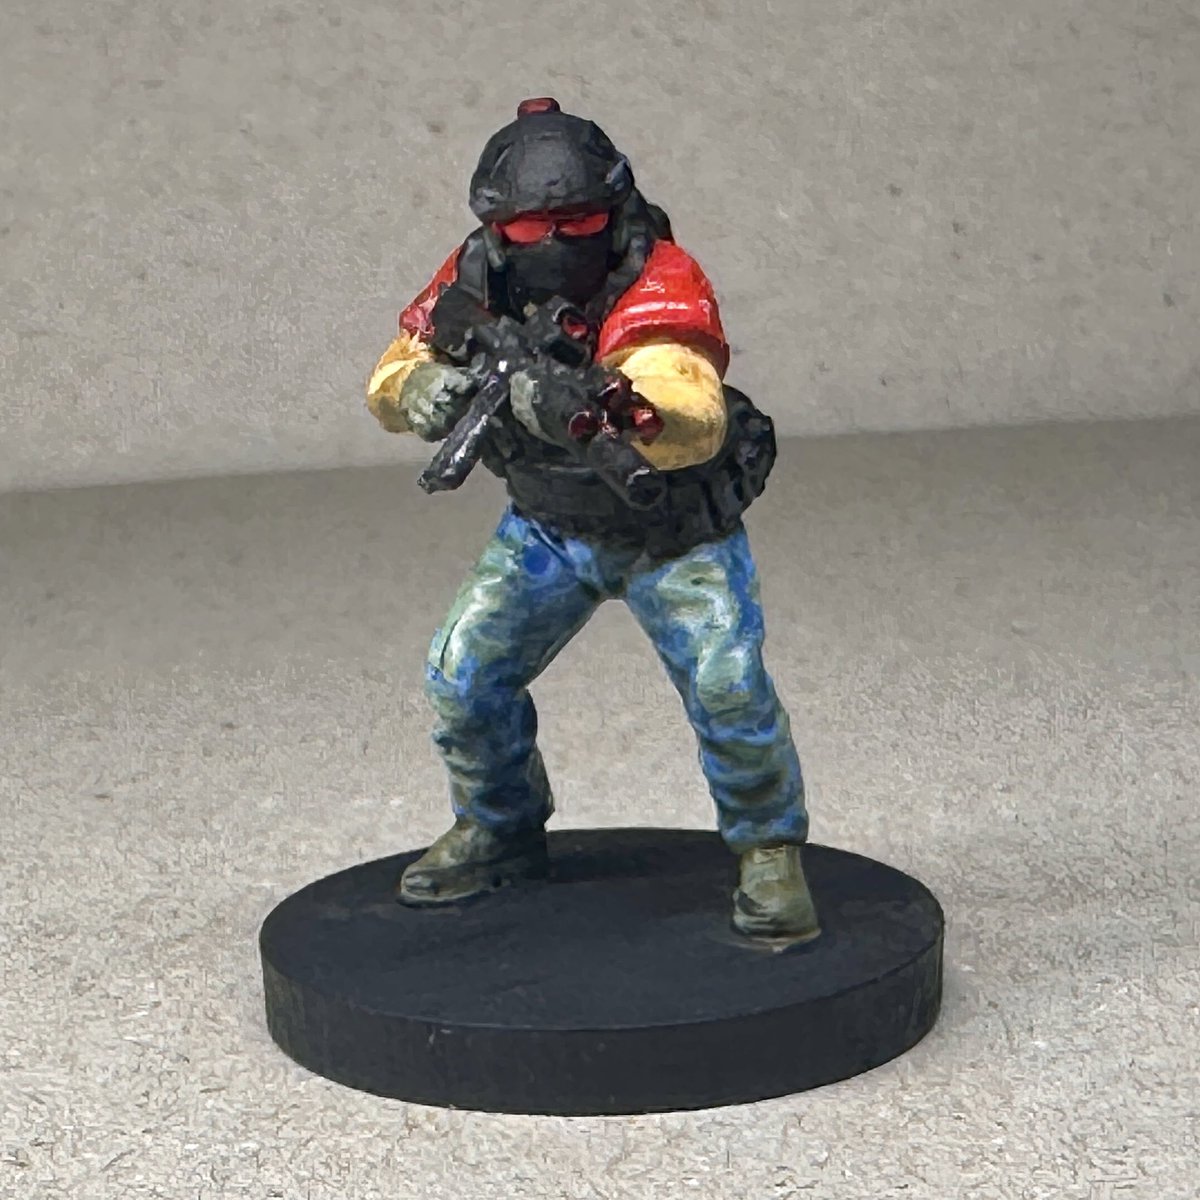 PMC squad in #blackpowderredearth style. Very nice #3dprint by @MiniaturesPat . First approach to painting denim 
#28mmminiatures
#miniaturepainting 
#modernminiaturewarfare
#spectreminiatures
#skirmishwargaming
#tabletopgames
#wargaming